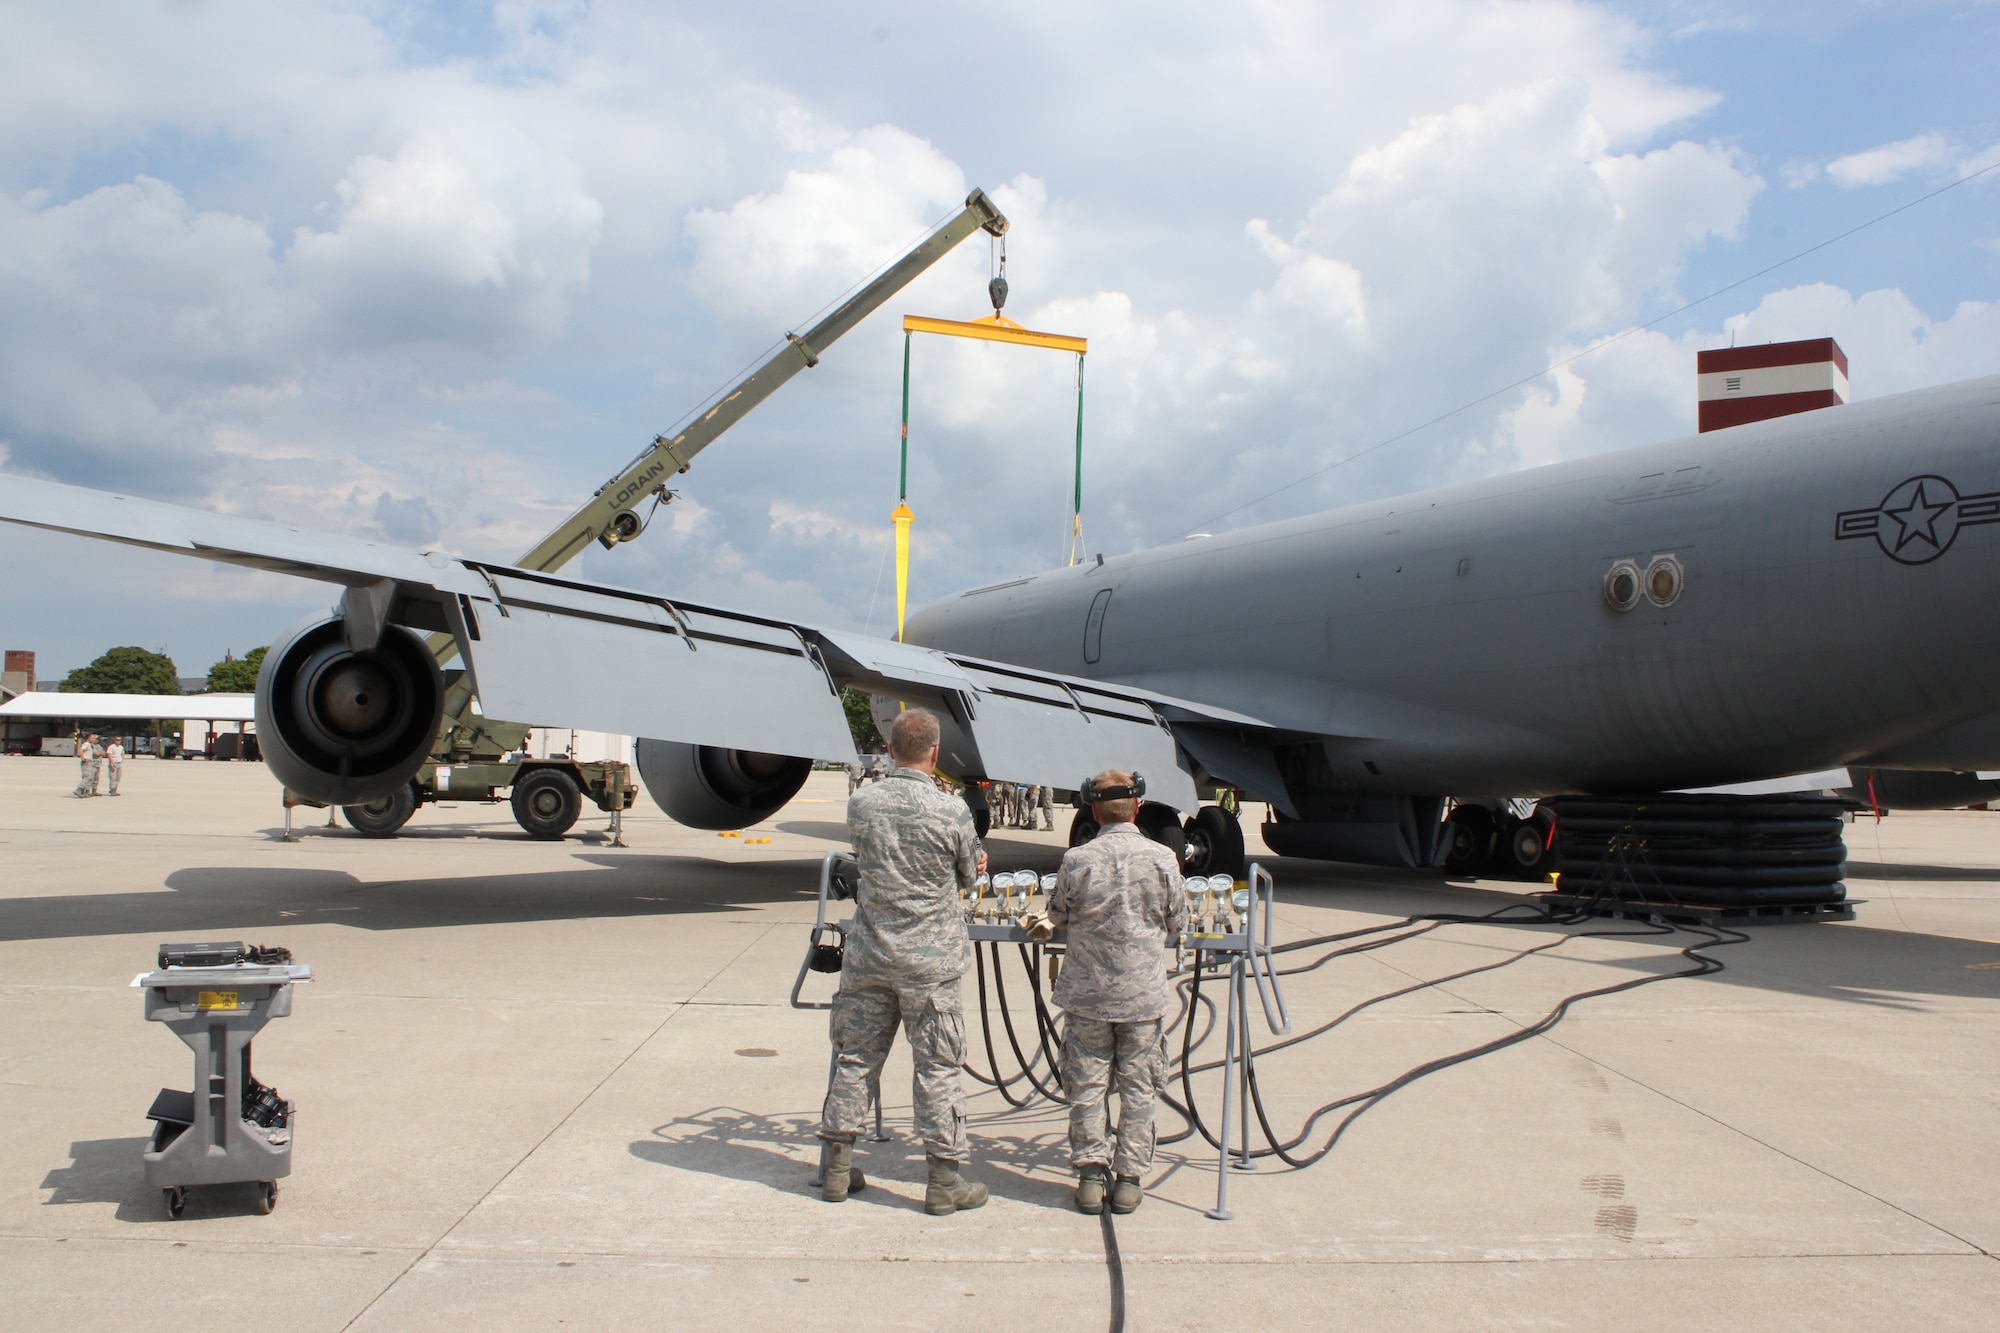 Two Airmen monitor an air pressure regulator as a crane prepares to lift the nose of a KC-135 Stratotanker during an exercise at Selfridge Air National Guard Base, Mich., Aug. 13, 2011. The 191st Maintenance Squadron performed an exercise in which they simulated a KC-135 Stratotanker had damaged nose gear and a crane was needed to move the aircraft to a safe location for repair. At the tail of the aircraft a series of inflated air bladders were used to help support the aircraft during the operation. (USAF photo by TSgt. Dan Heaton)